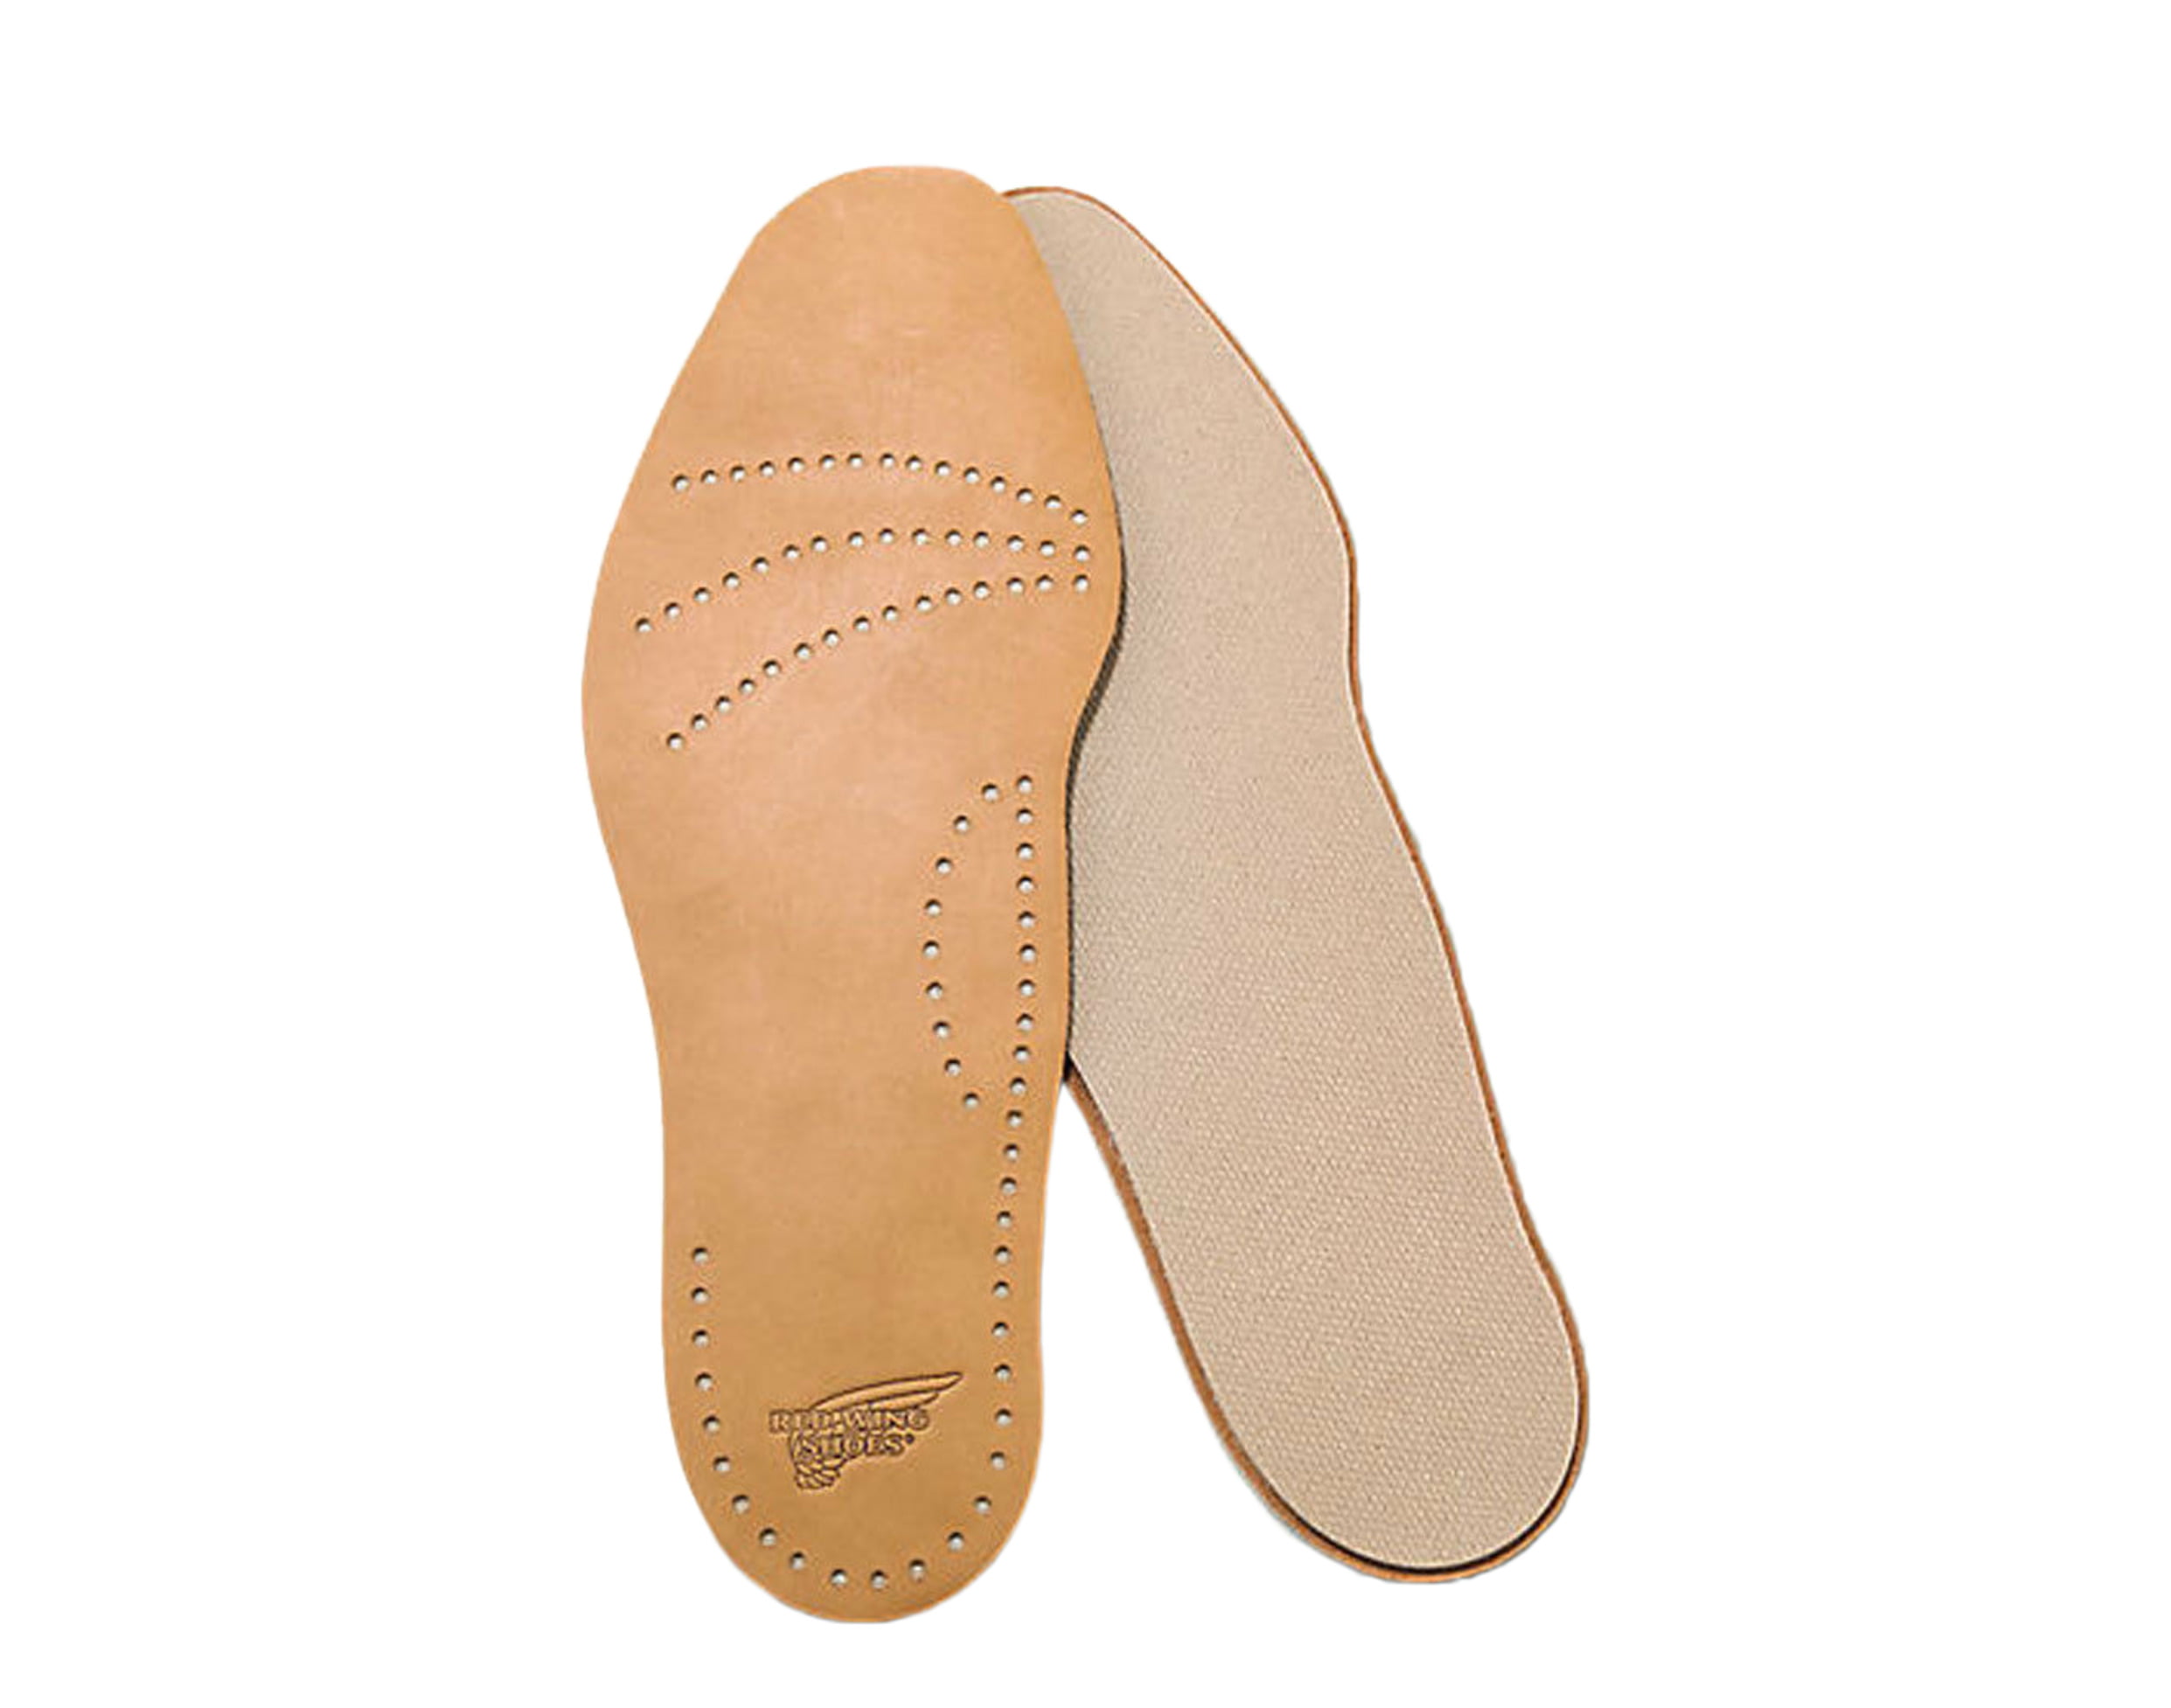 Red Wing Heritage Leather Footbed Insoles Large - Walmart.com